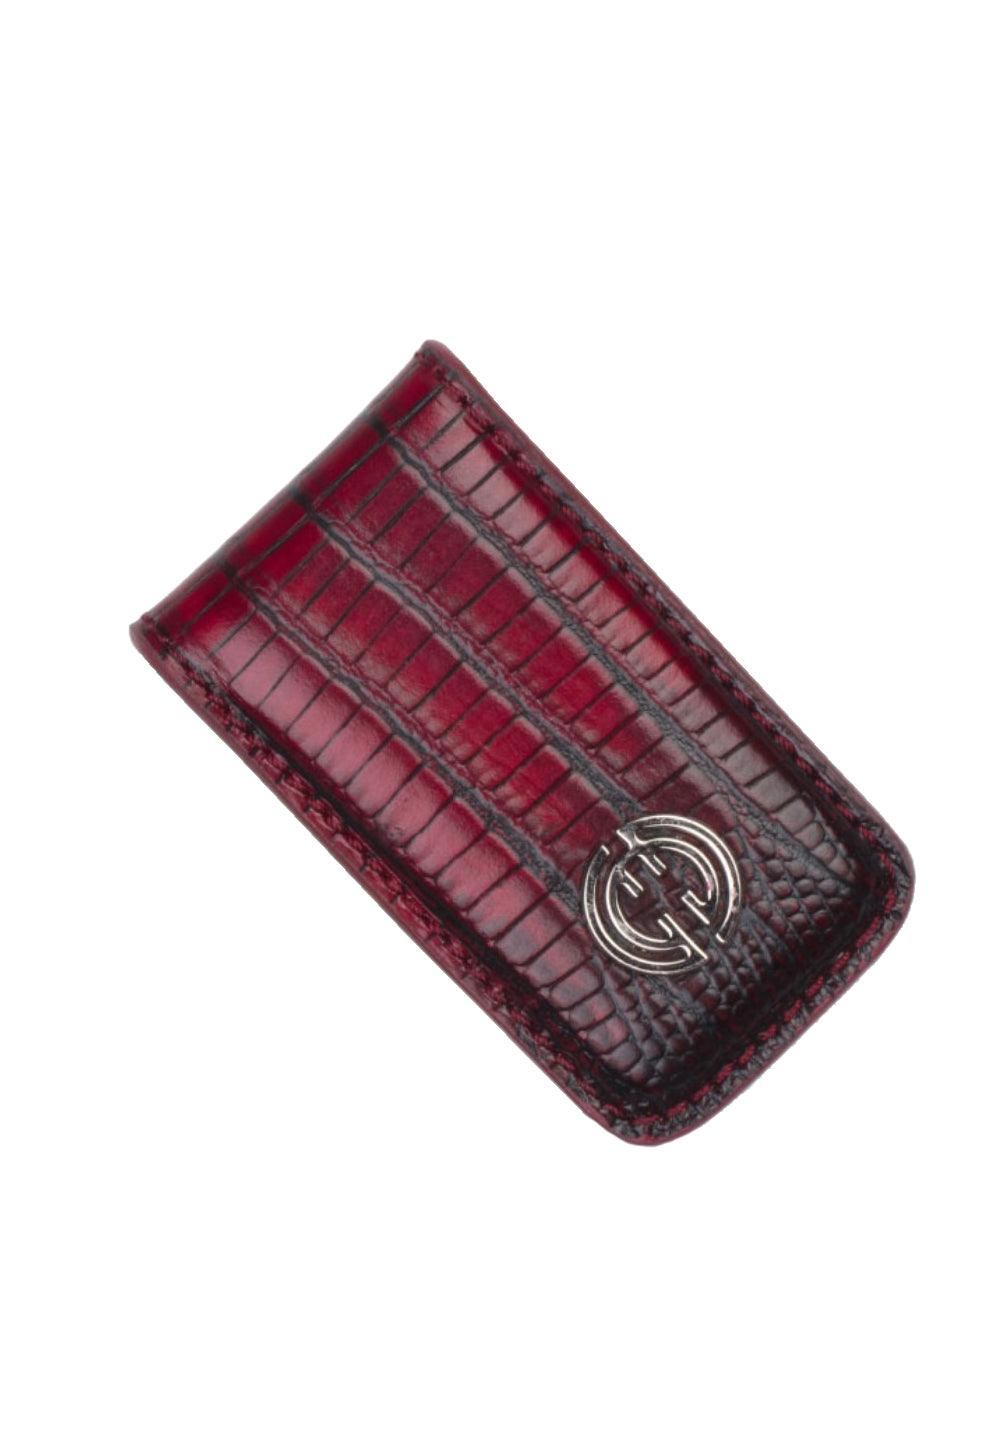 Keep it simple, yet cool, with this soft leather stamped snake pattern.  The leather stamped snake pattern in ruby red is a perfect complement to any bottoms. Genuine leather over metal clamp. Perfect to travel light and keep your valuables in your front pocket.  By Marcello Sport